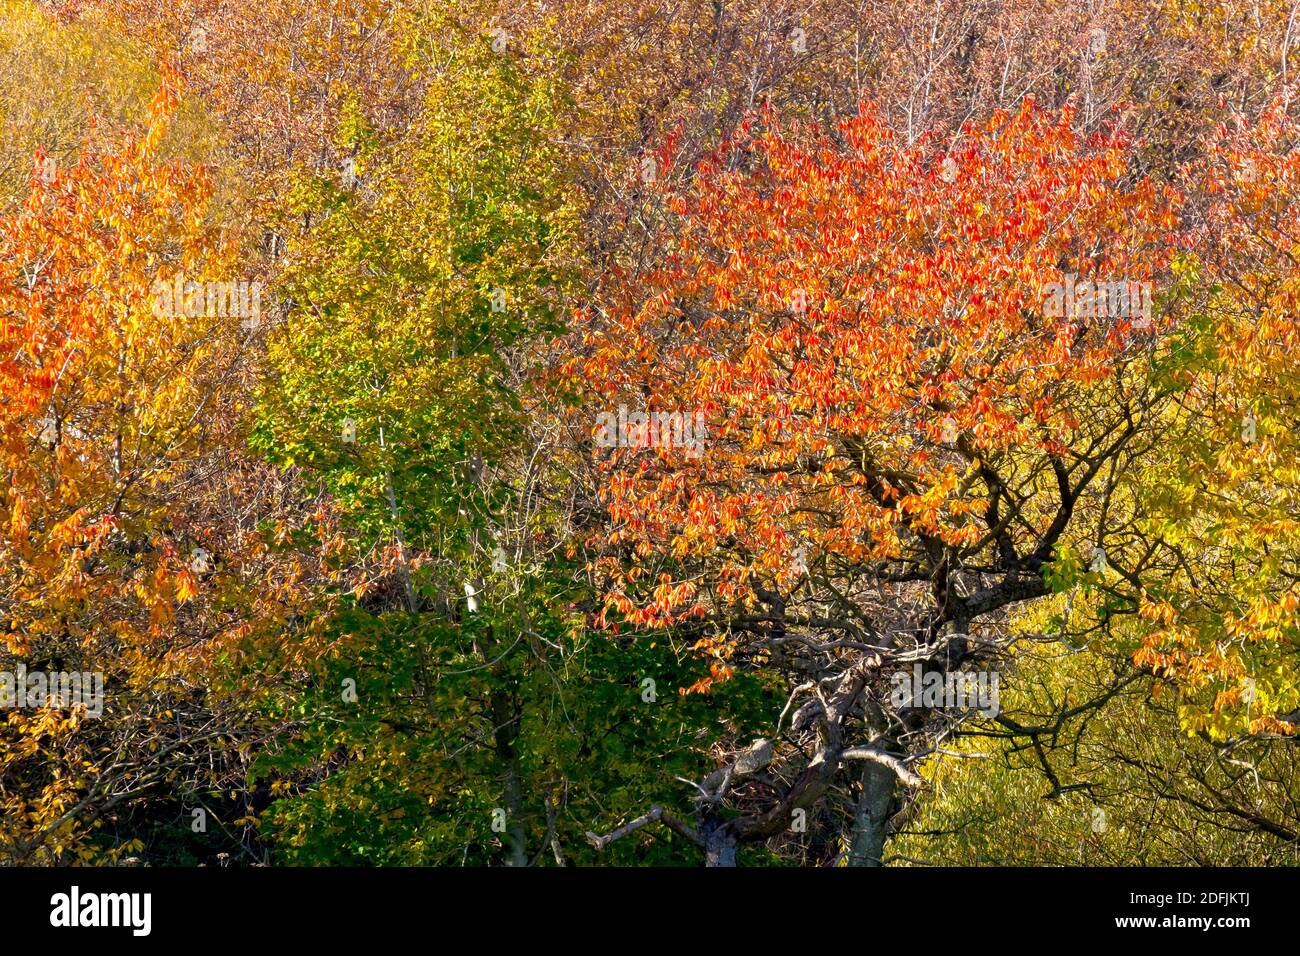 Wild Cherry trees (prunus avium) in the autumn, the leaves varying in colour from green, through yellow, to red. Stock Photo